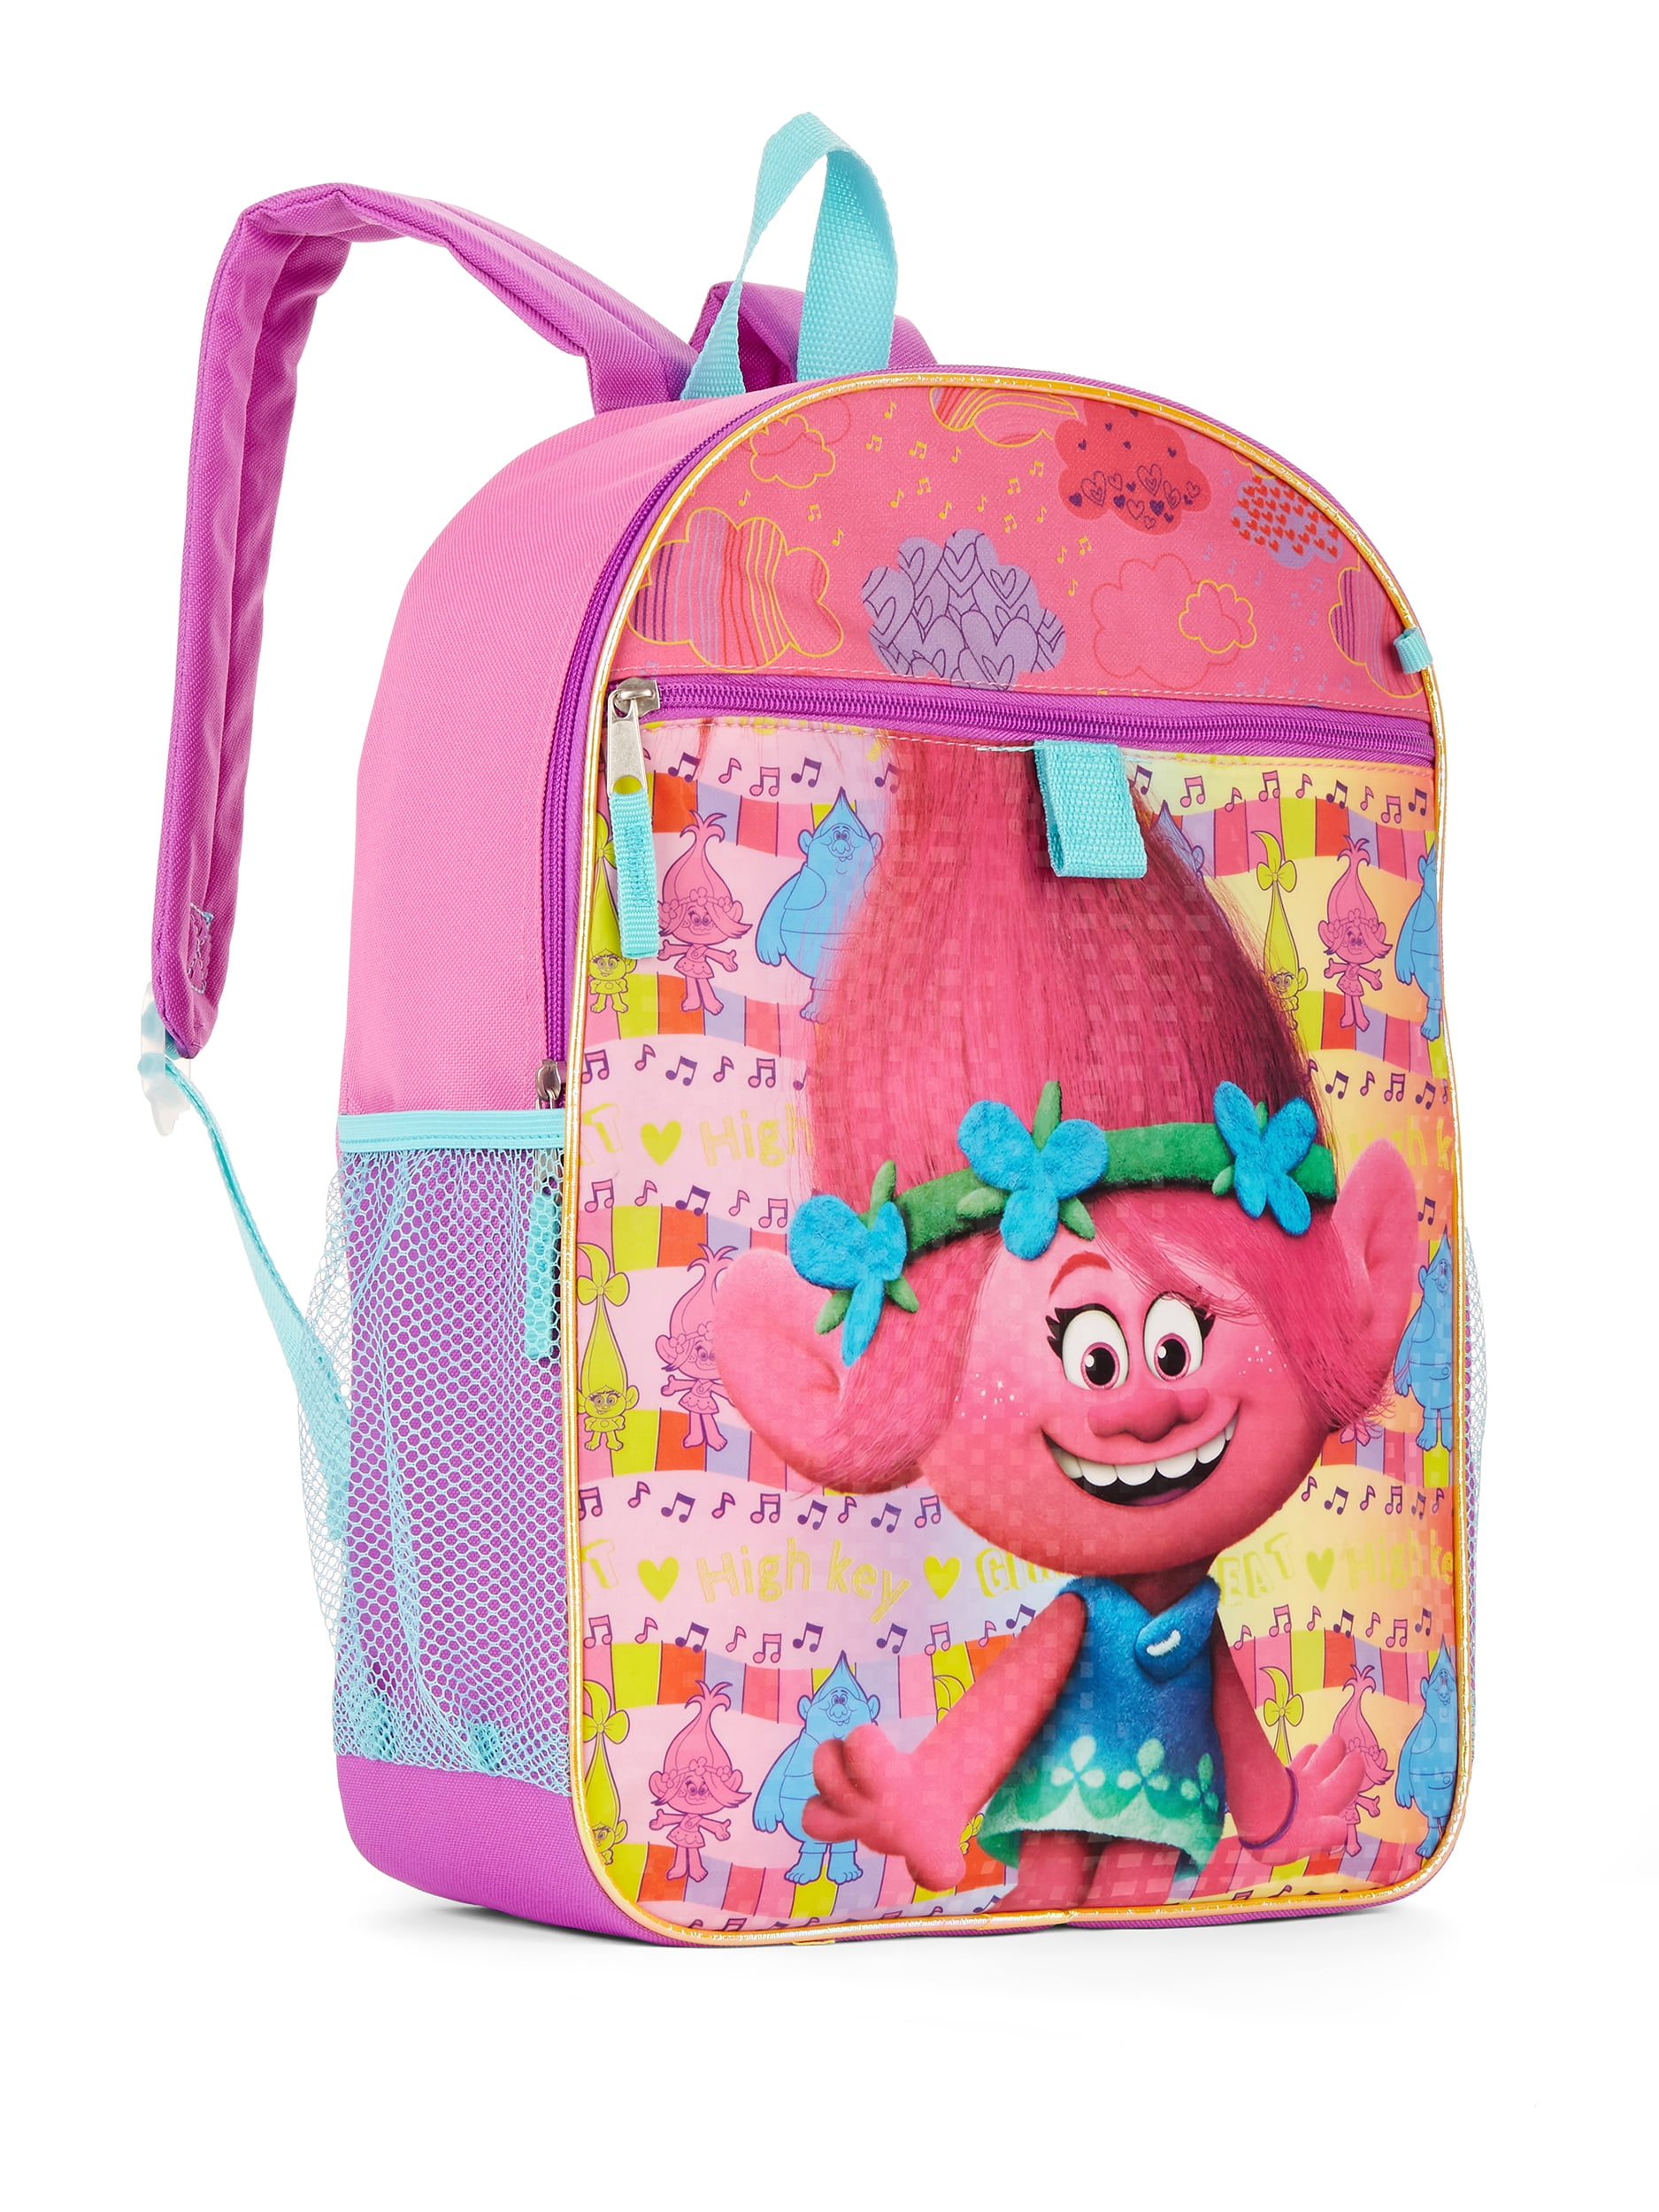 Dreamworks, Accessories, Pink Trolls 4piece Backpack Set Lunchbox Pencil  Case Carabiner Nwt Lh455